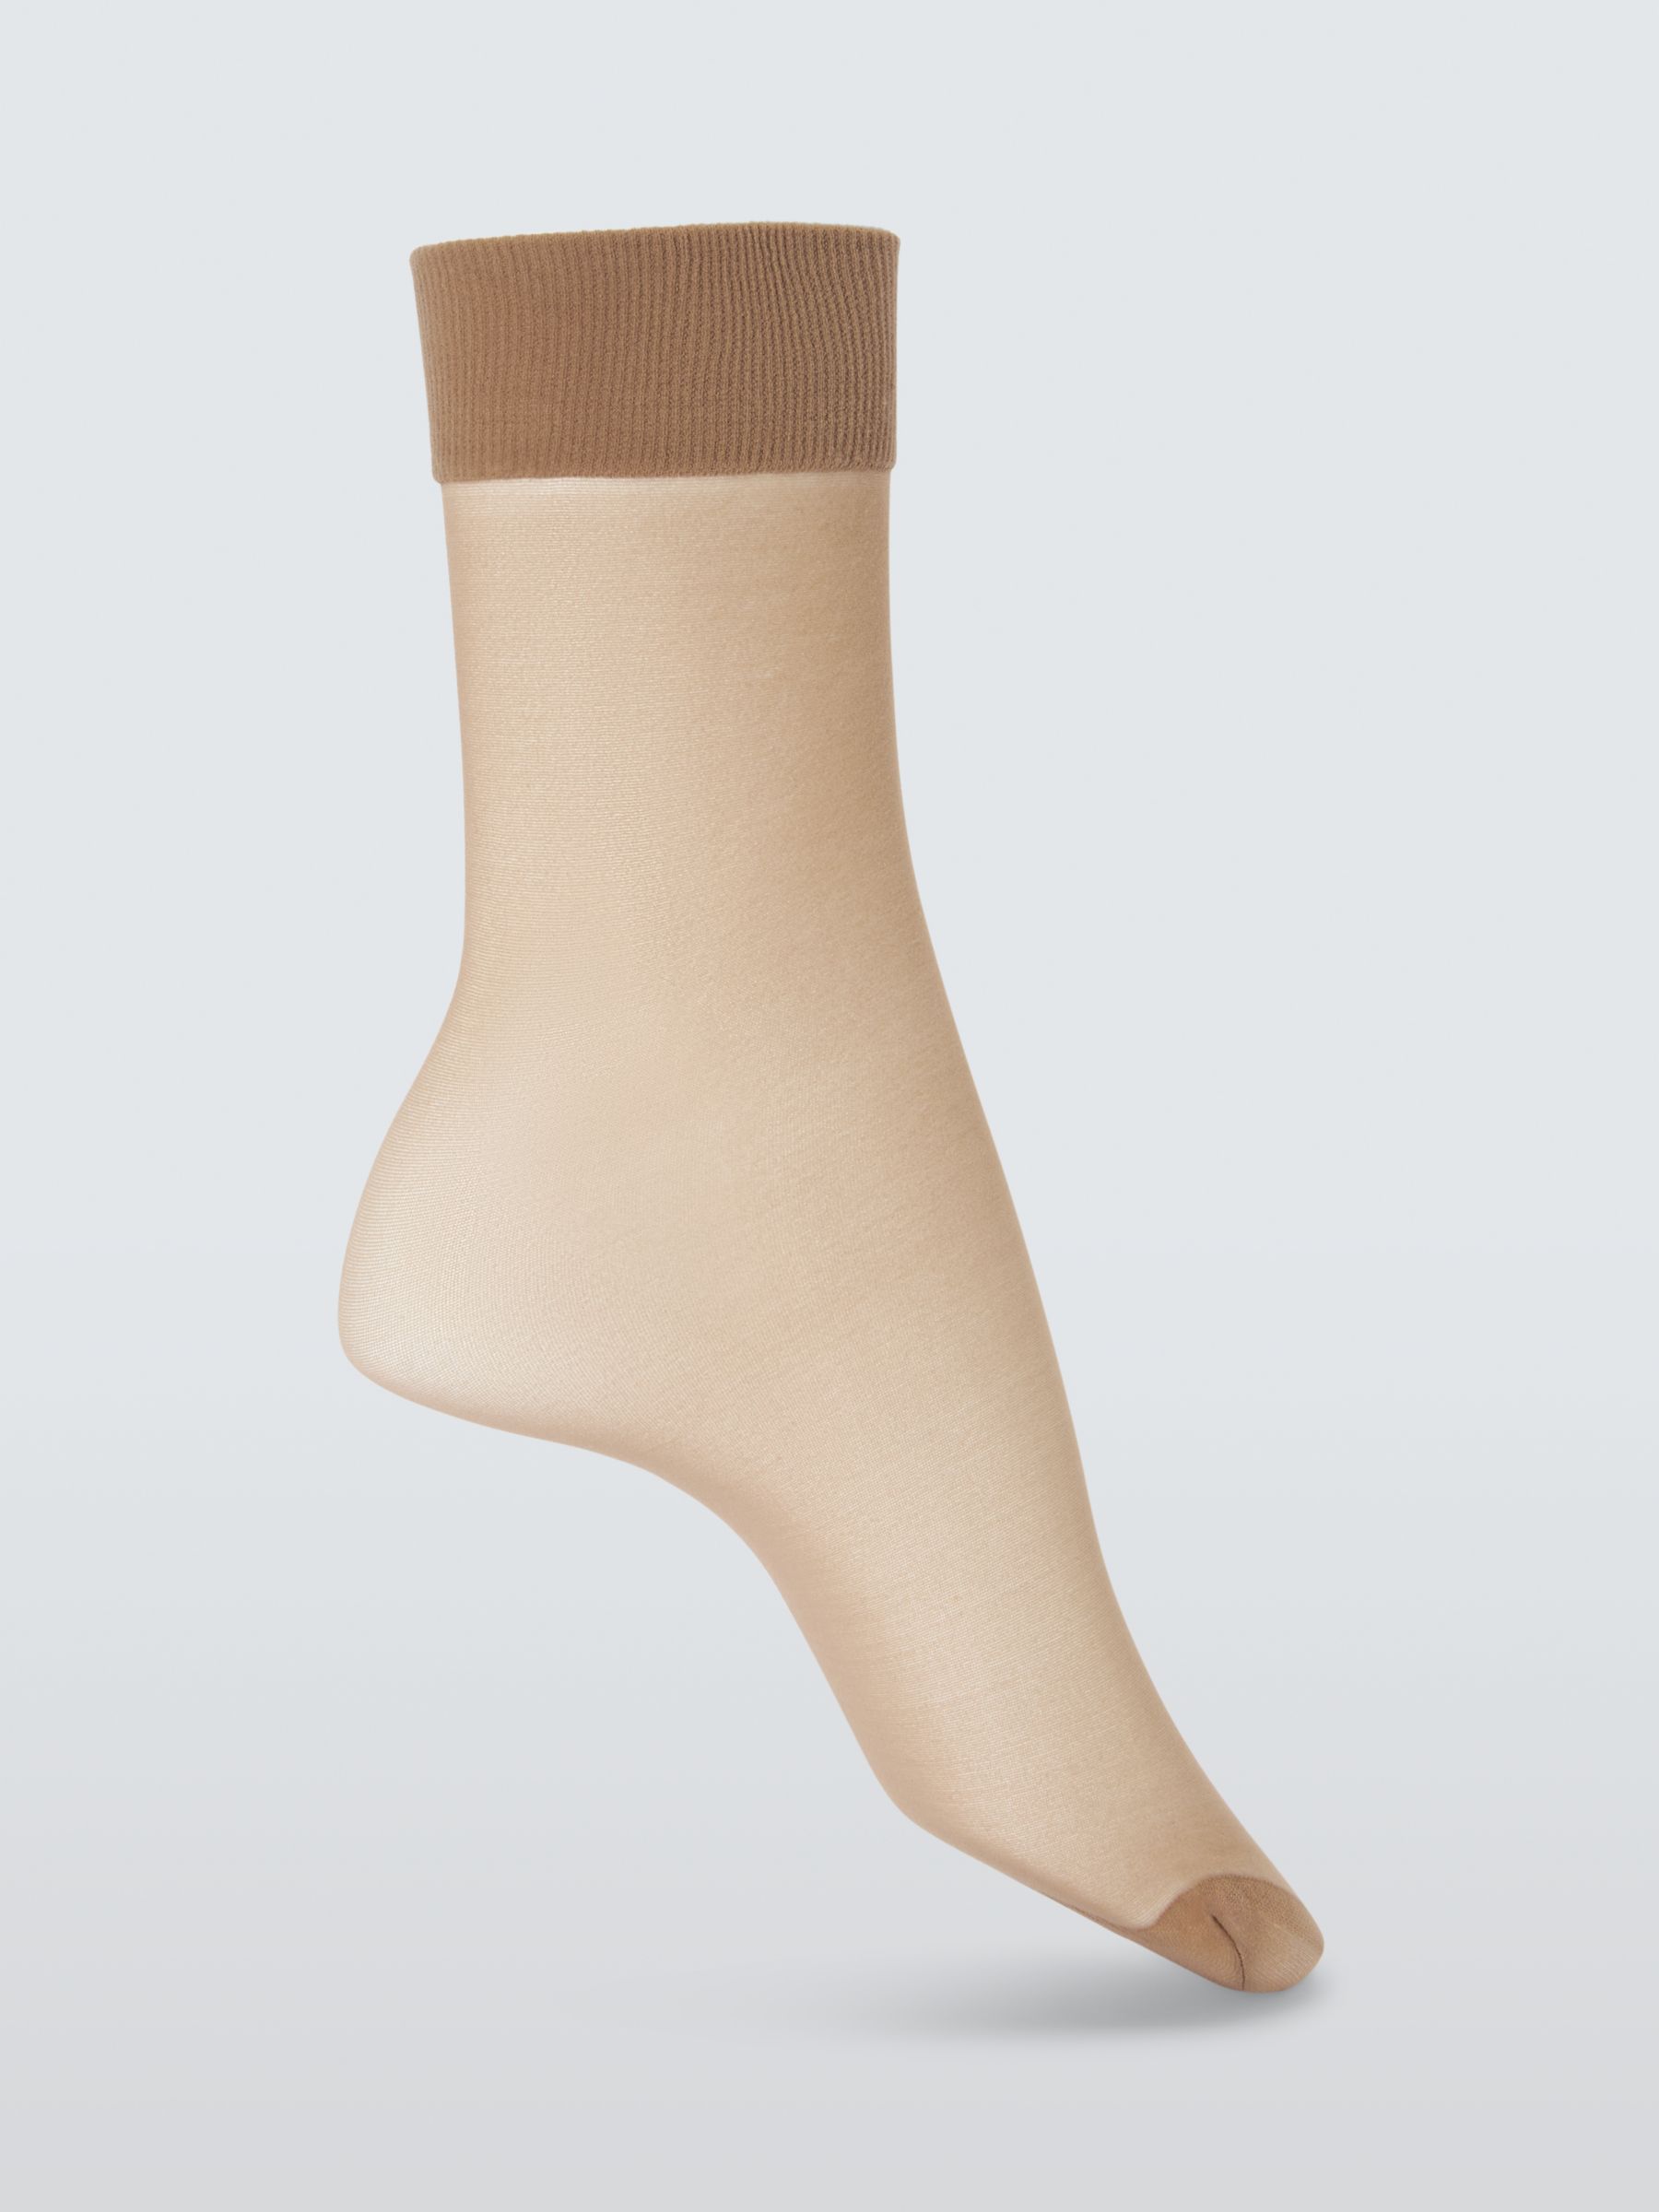 John Lewis Bodyshaper Tights Barely There Medium Control 7 Denier Large  Nude BN for sale online